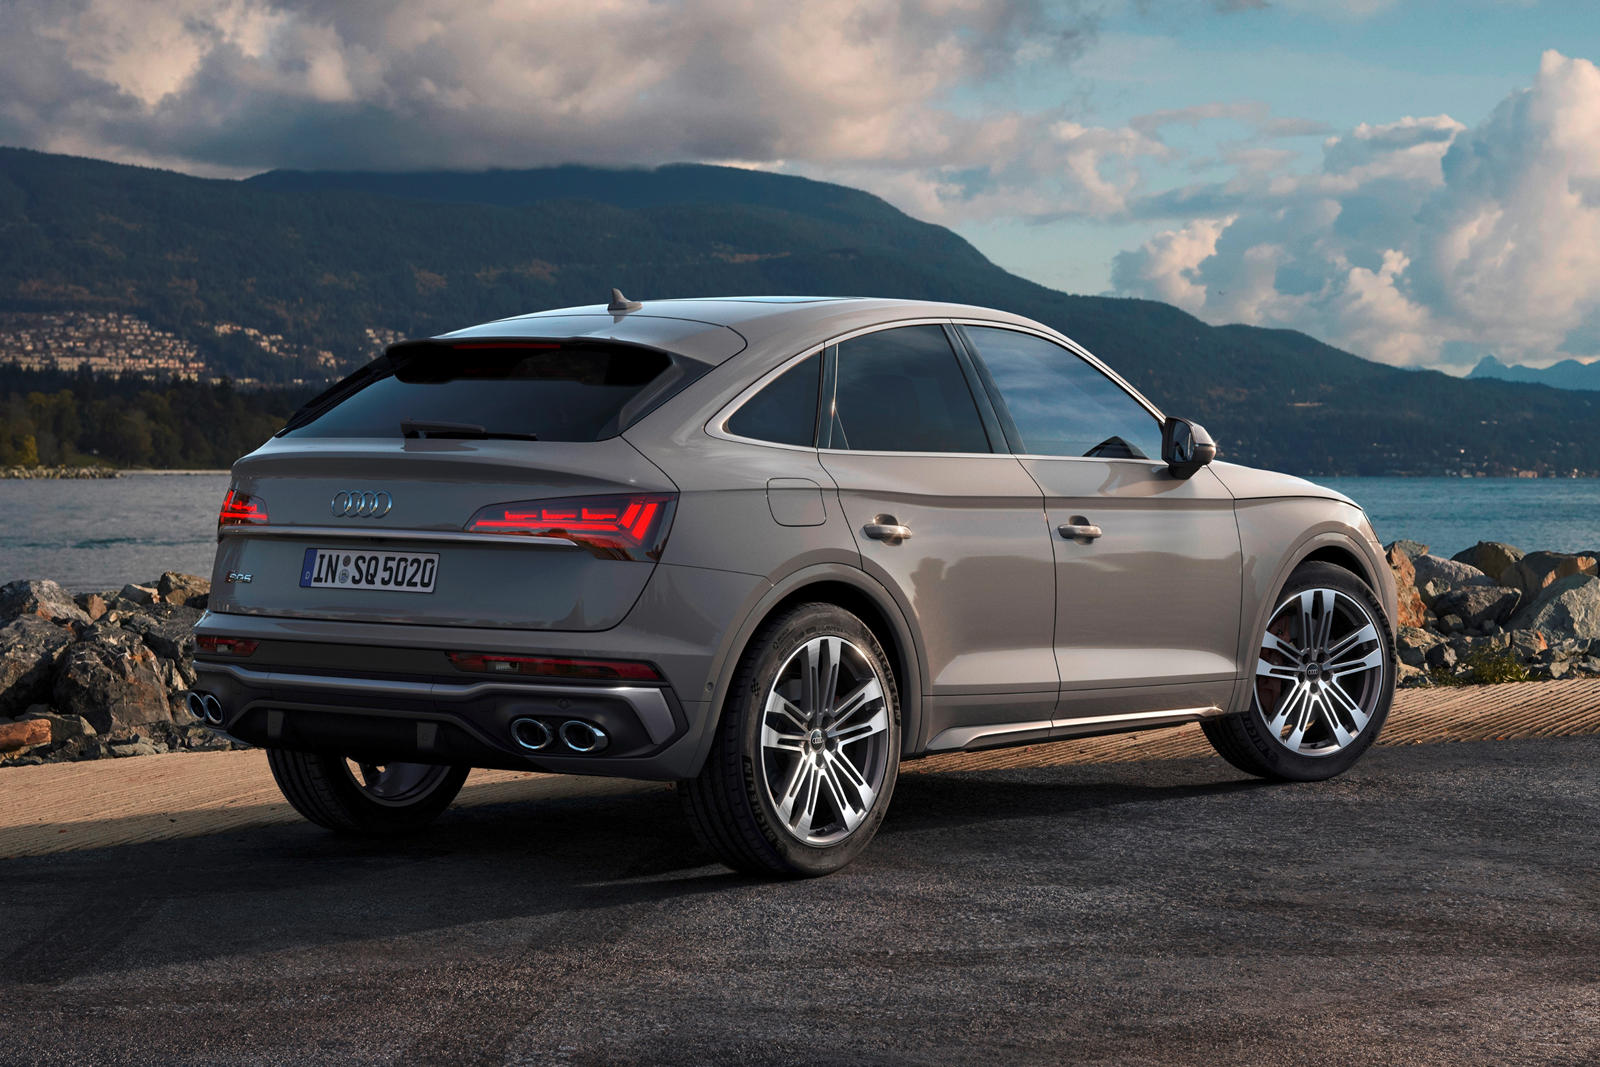 2022 Audi SQ5 Prices, Reviews, and Photos - MotorTrend